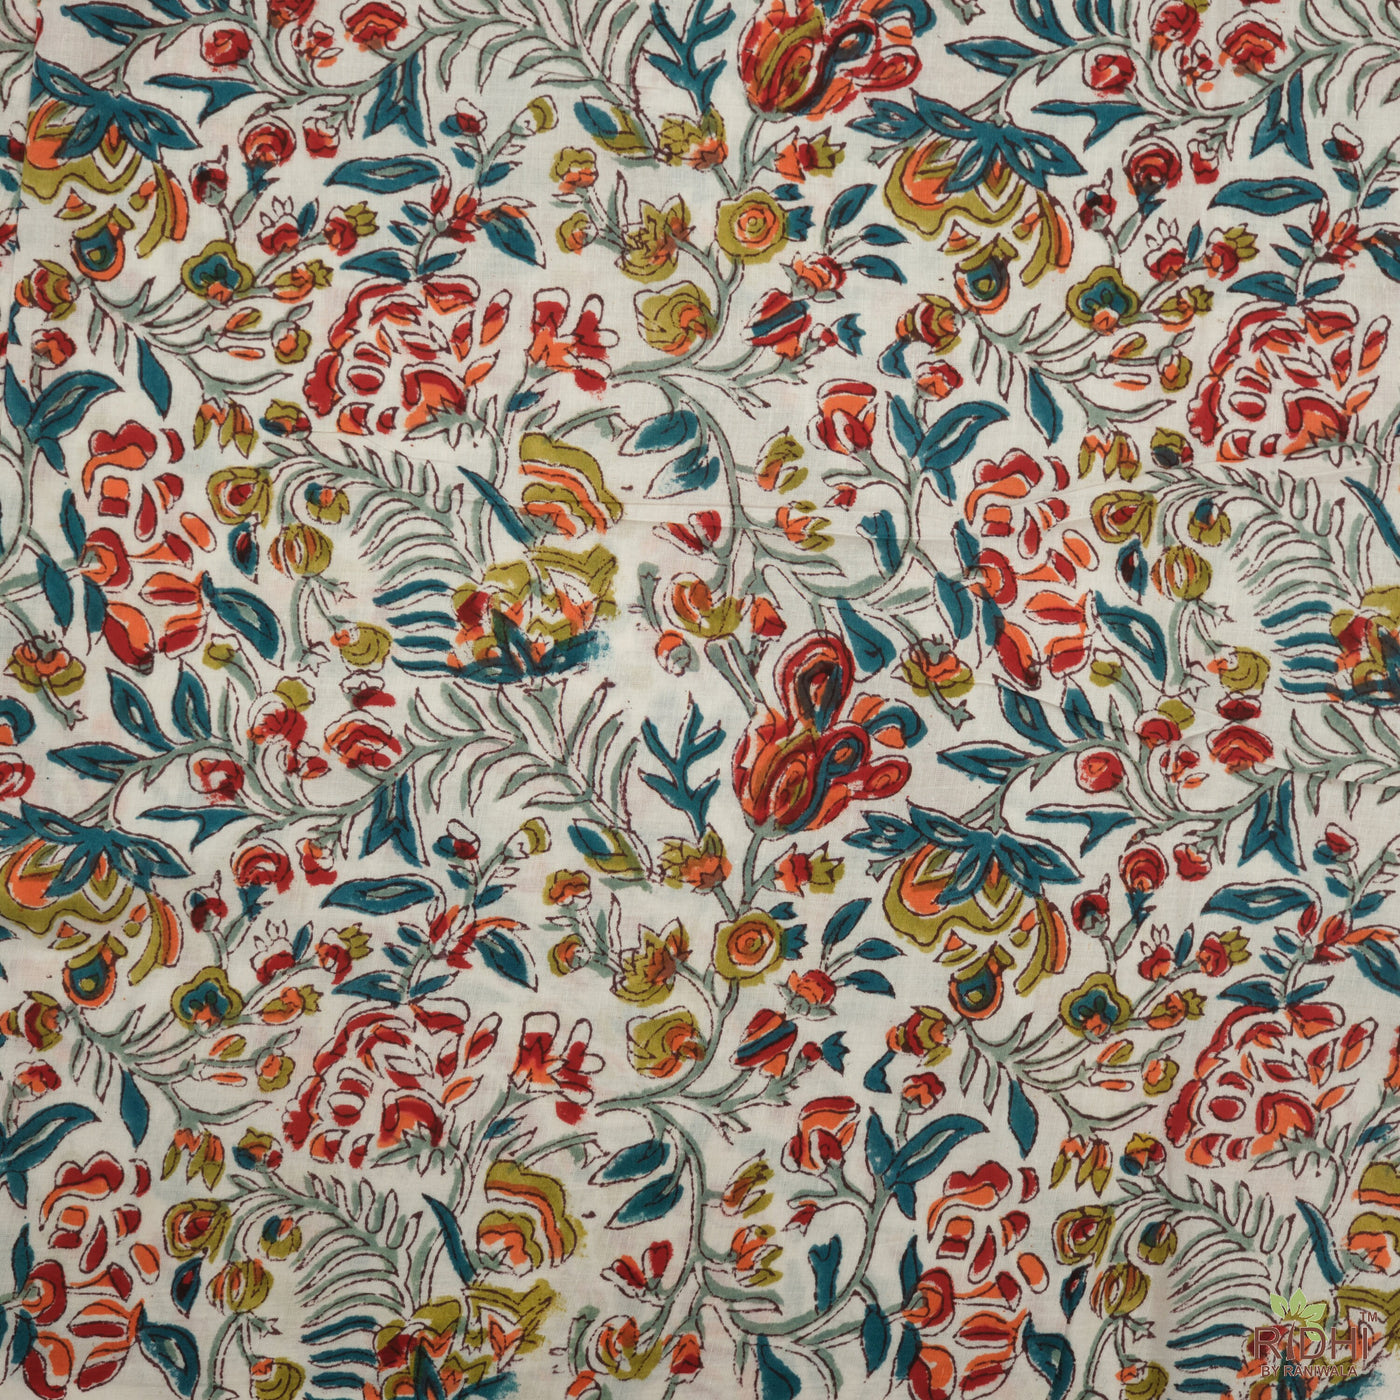 Sangria Red, Ginger Orange, Pine Green Indian Floral Hand Block Printed 100% Pure Cotton Cloth, Fabric by the yard, Curtains Pillows Cushion